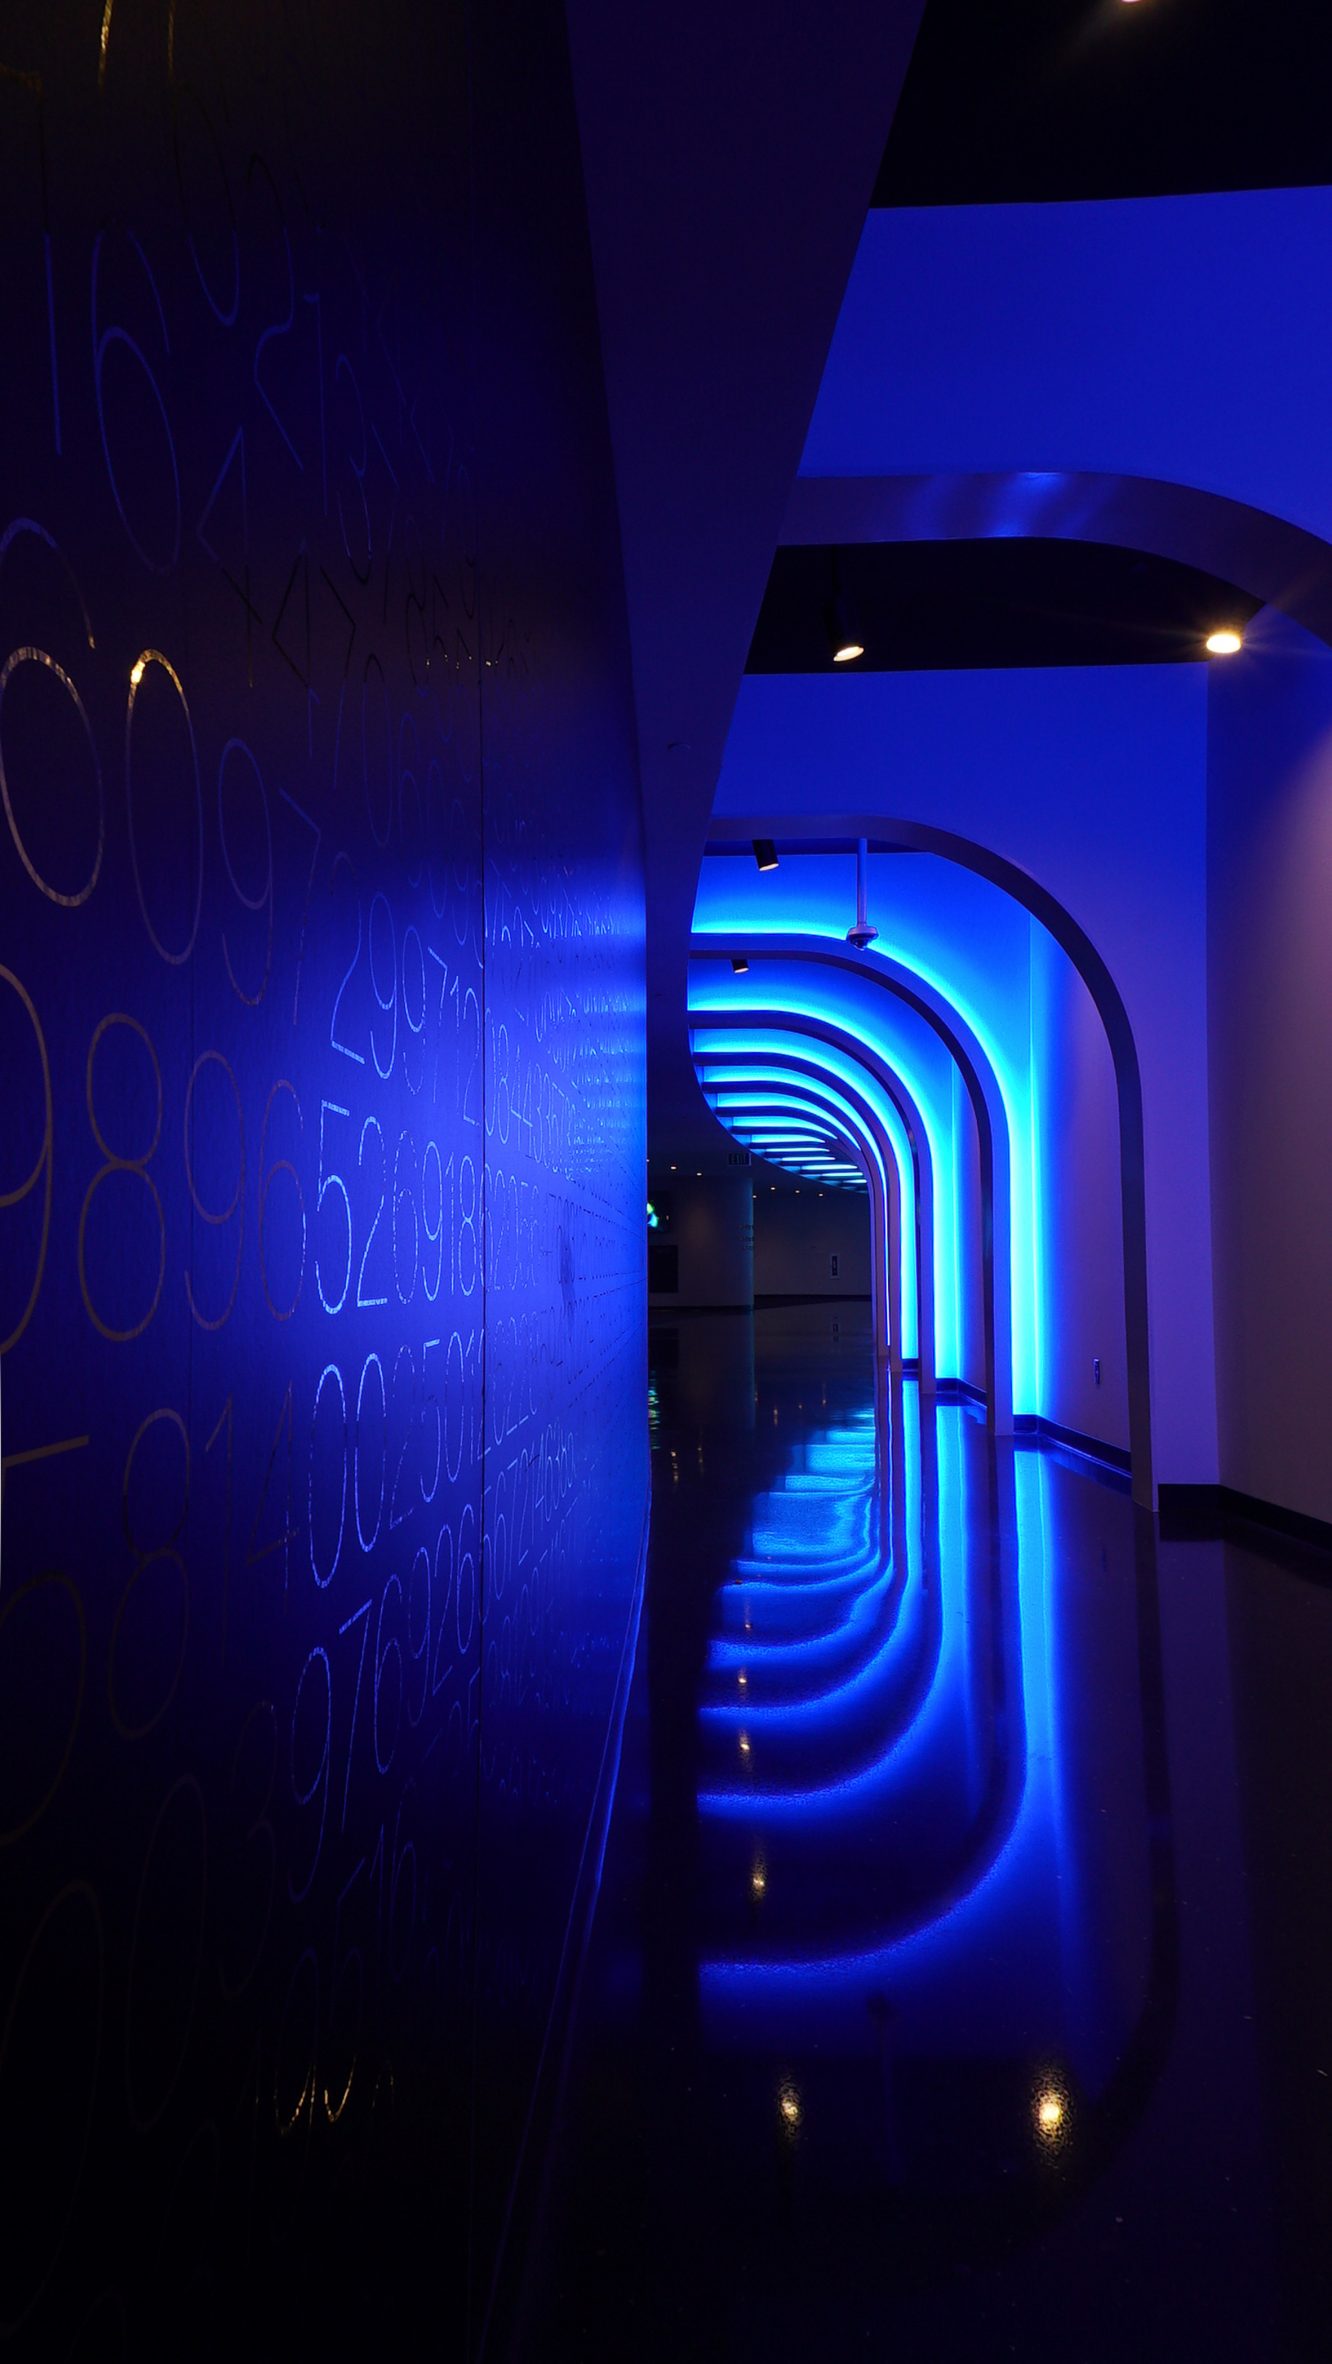 Dark tunnel with arches illuminated with blue light